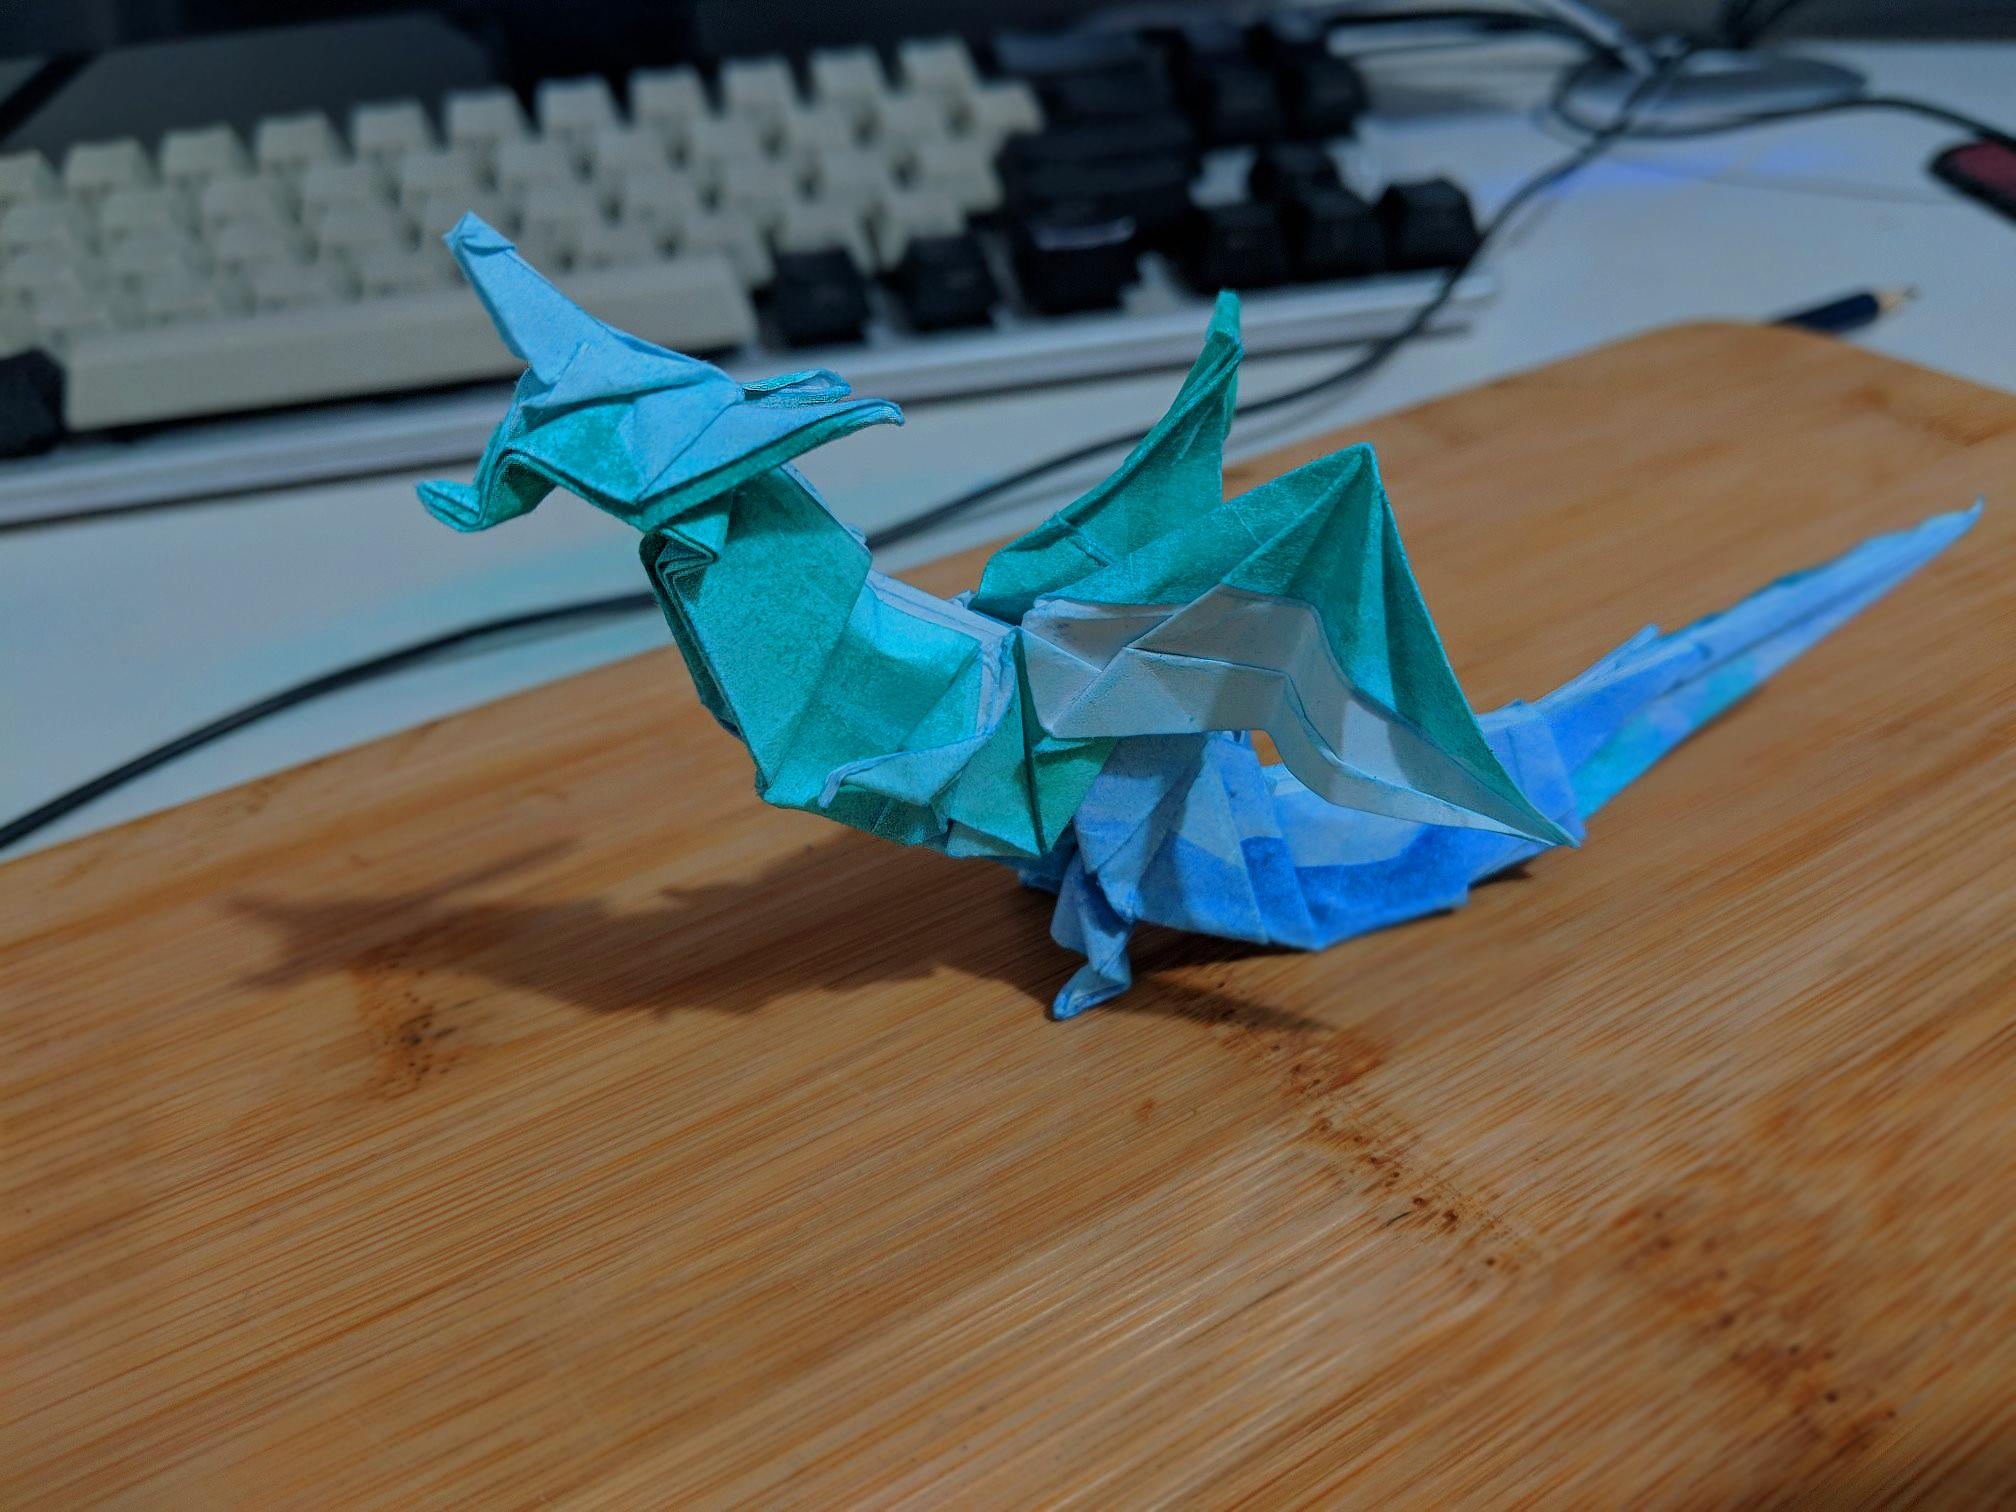 Printer Paper Origami Fiery Dragon Kade Chan Folded Me On Painted Printer Paper